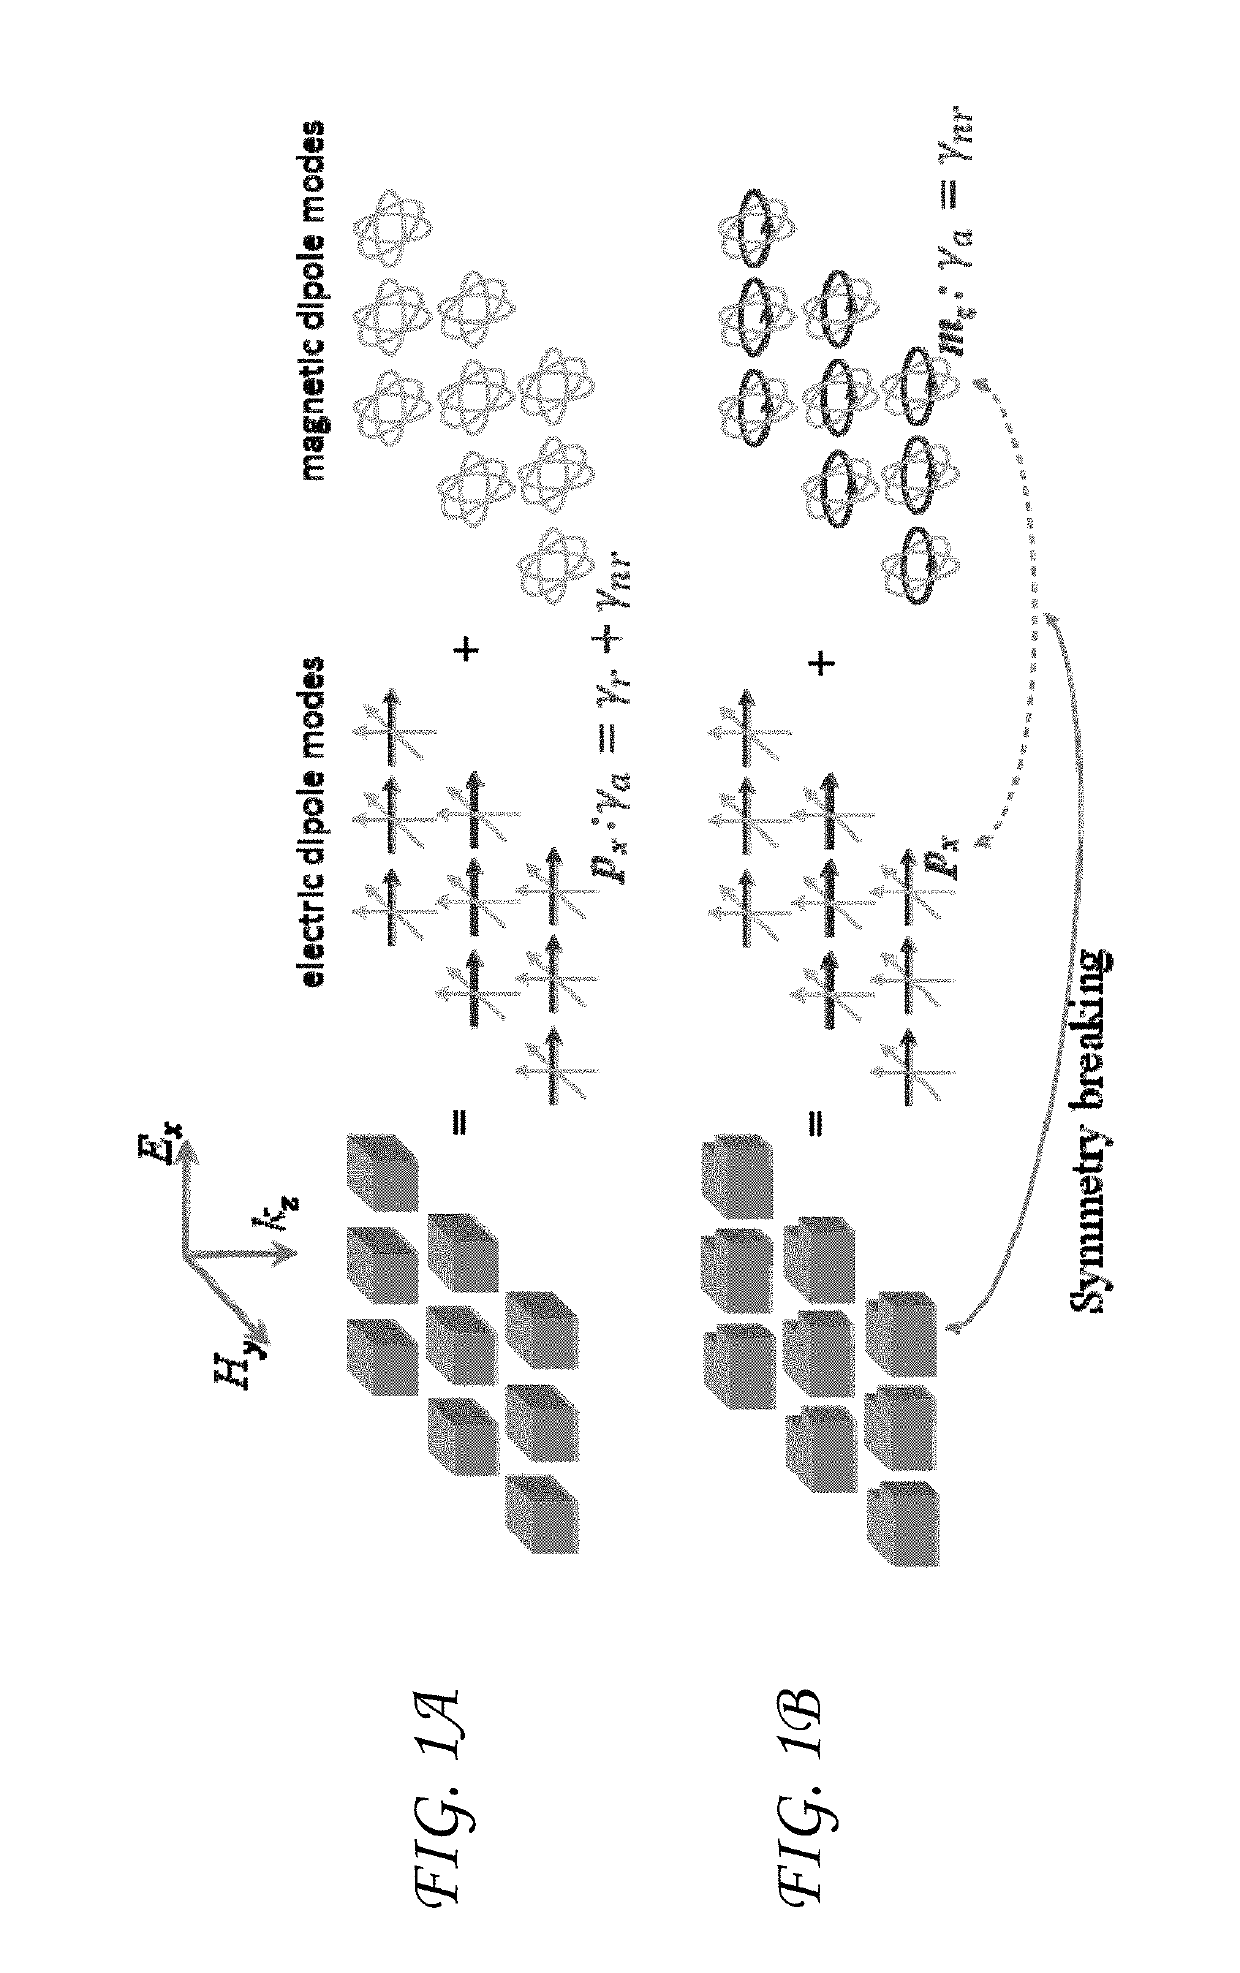 Rapidly tunable, narrow-band infrared filter arrays